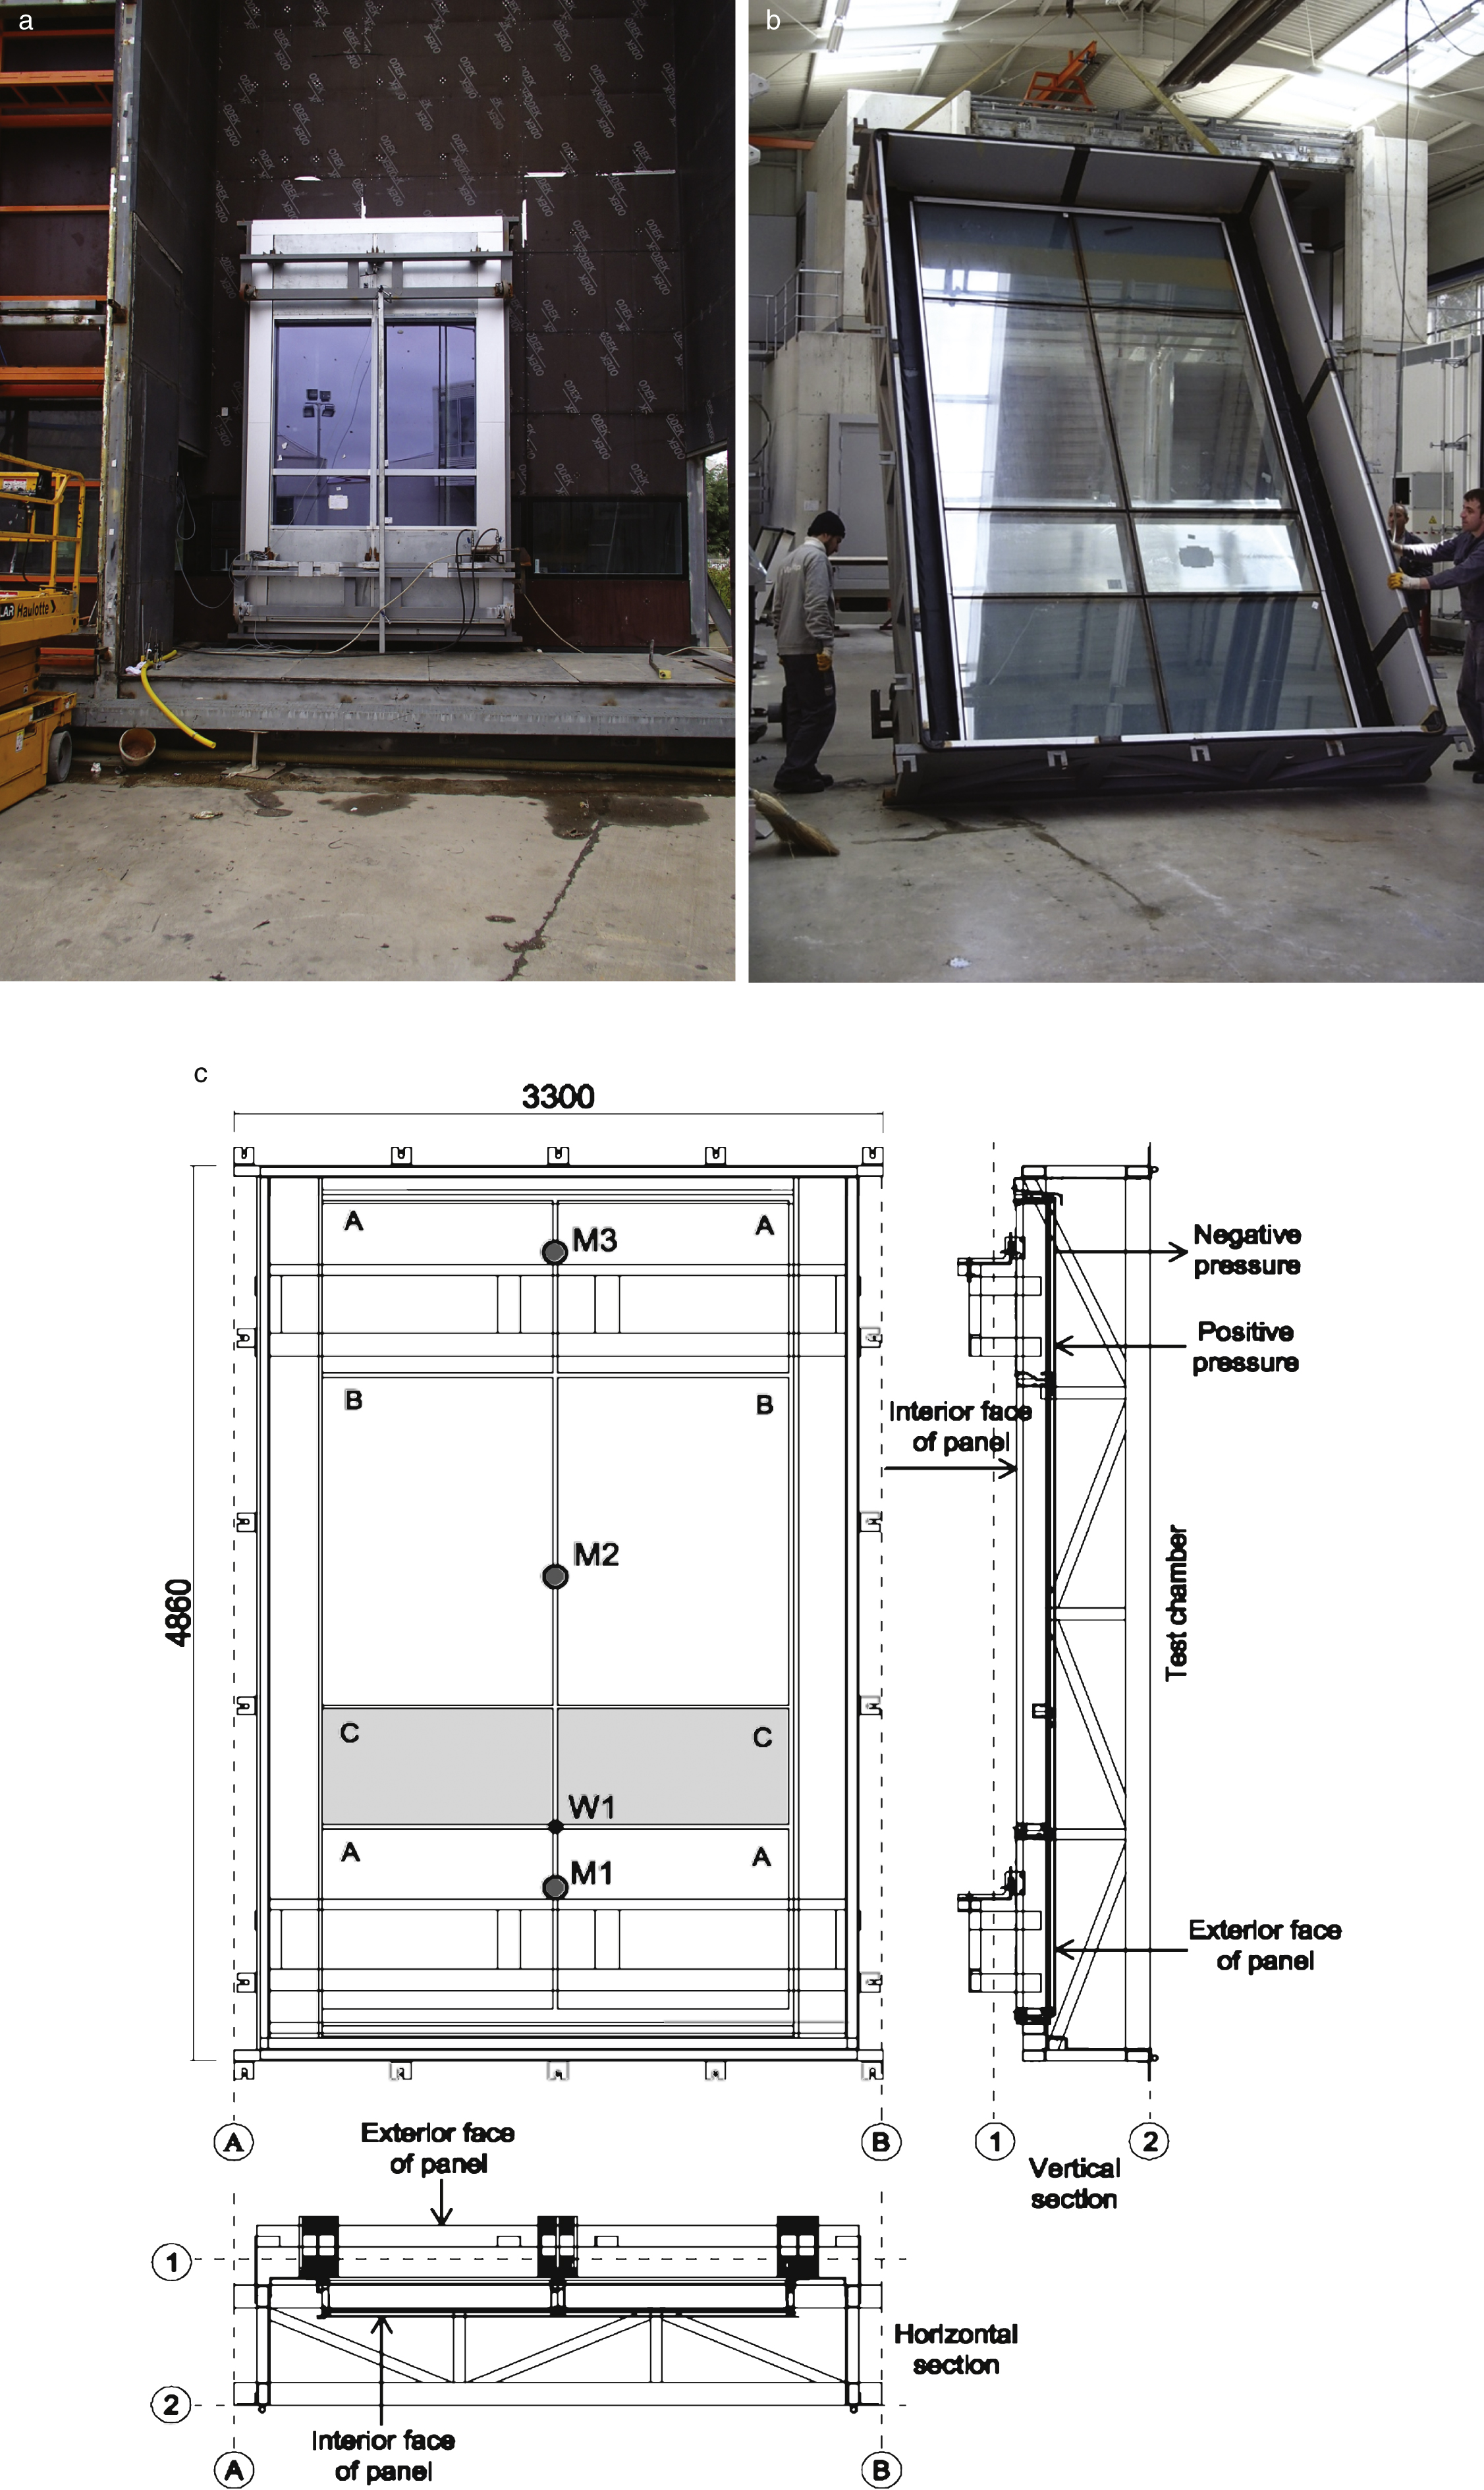 Mock-up Design (1:1 Scale). a: Panel mounted in test rig (interior face). b: Exterior face of the panel. c: Specimen geometry, applied static pressures and measurement points (M1, M2, M3 and cross-sections A-B).